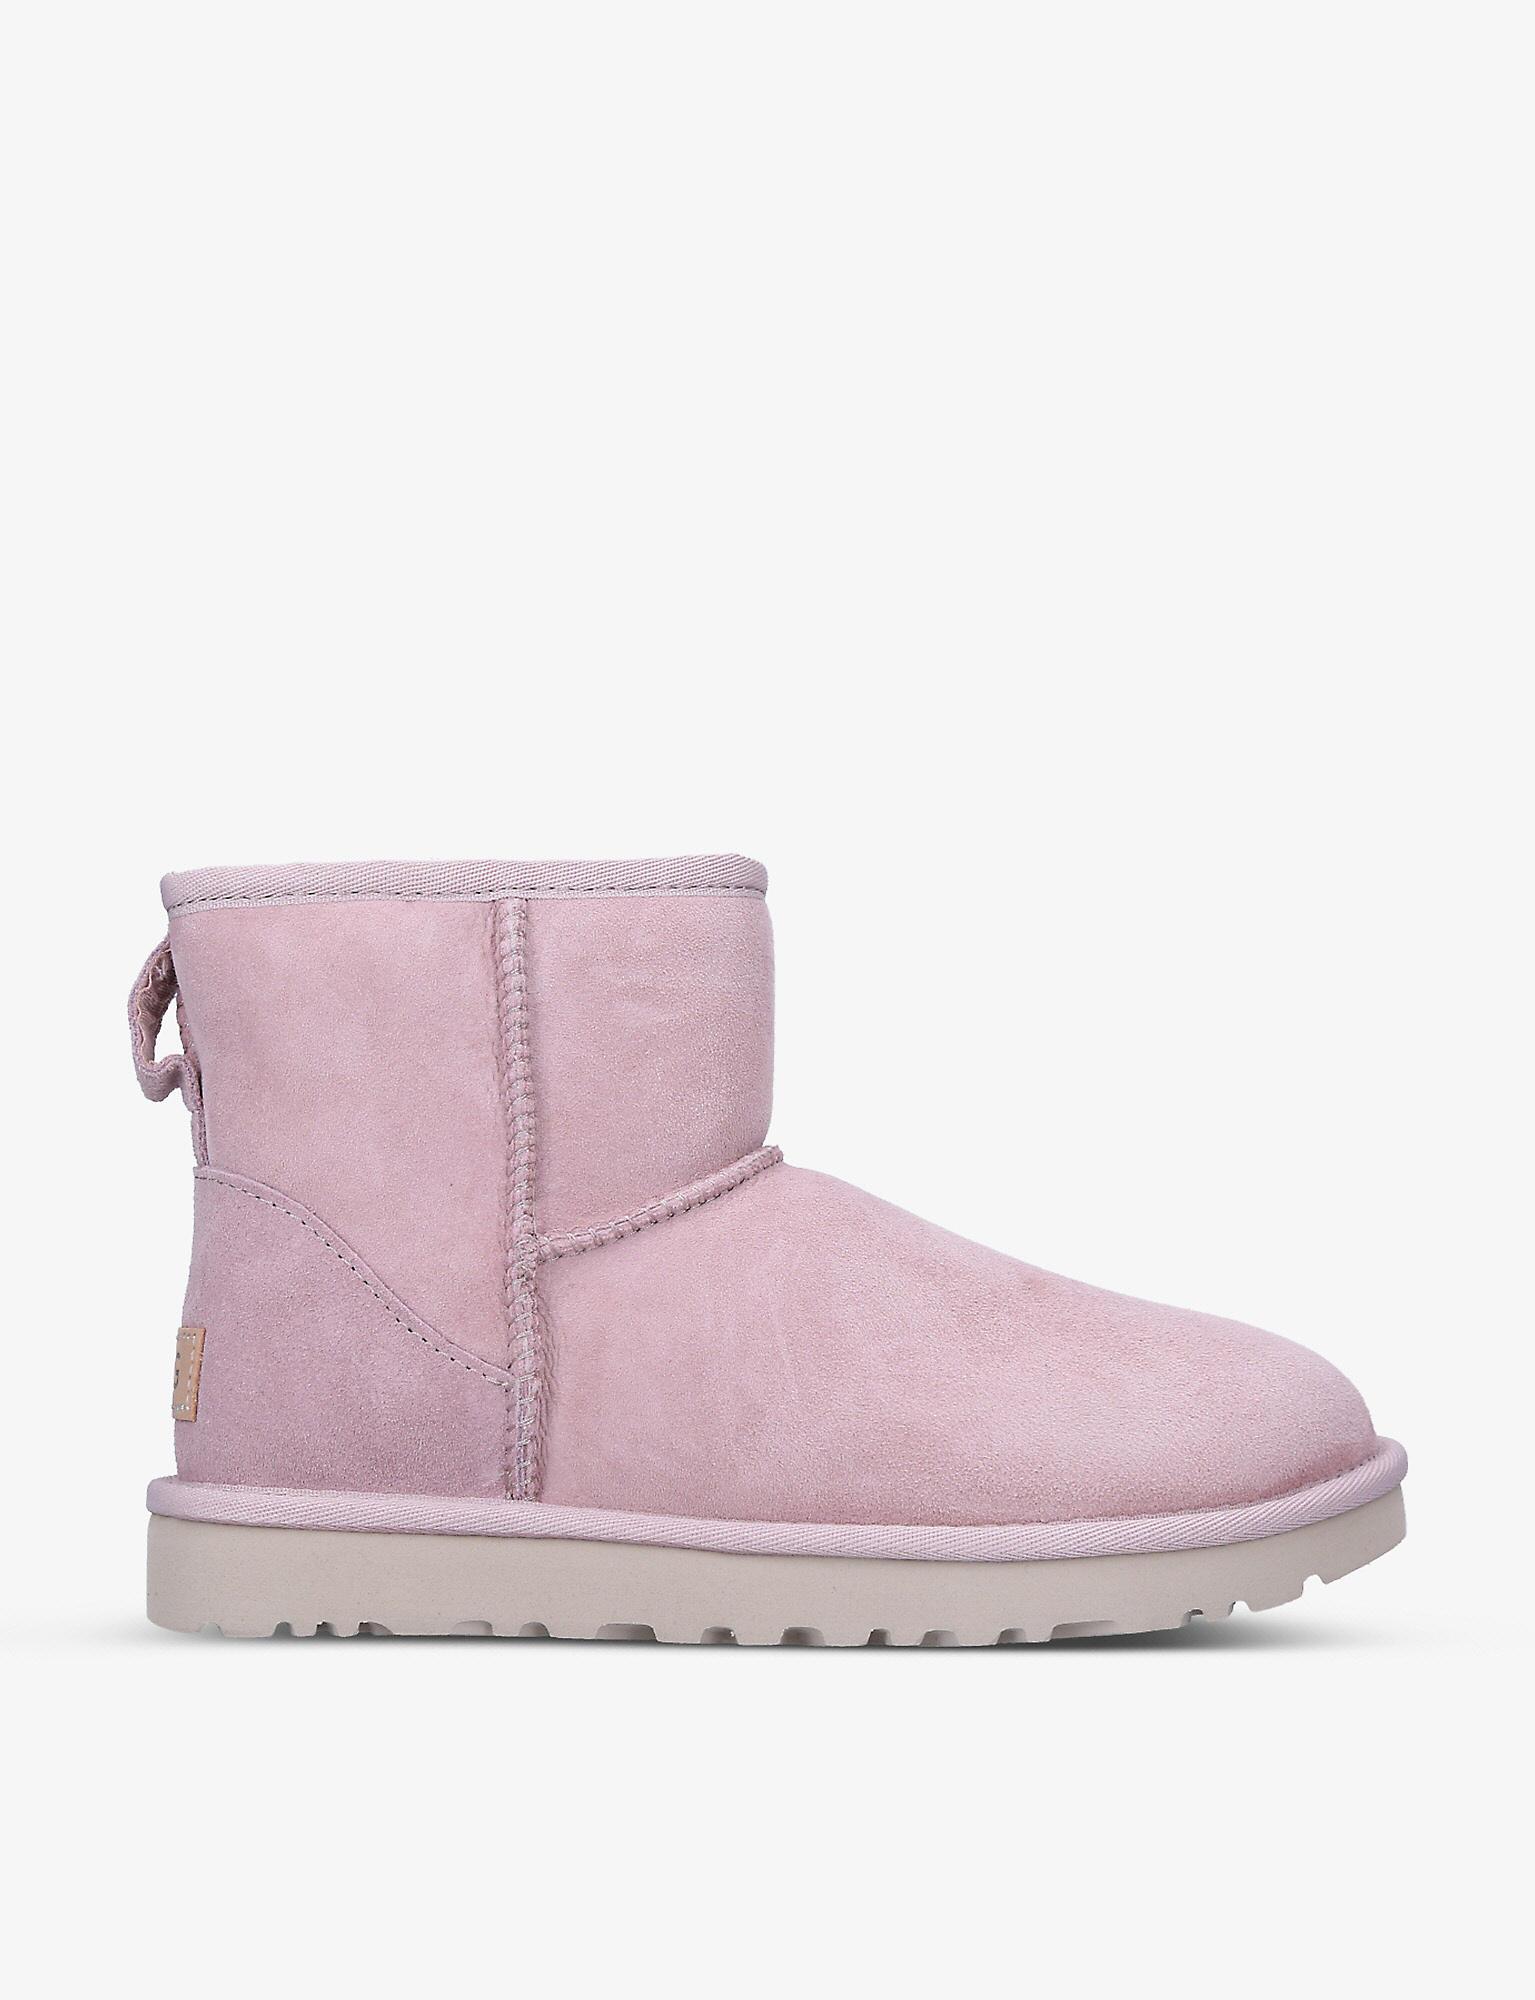 UGG Classic Mini Ll Suede And Shearling Boots in Pink | Lyst Canada